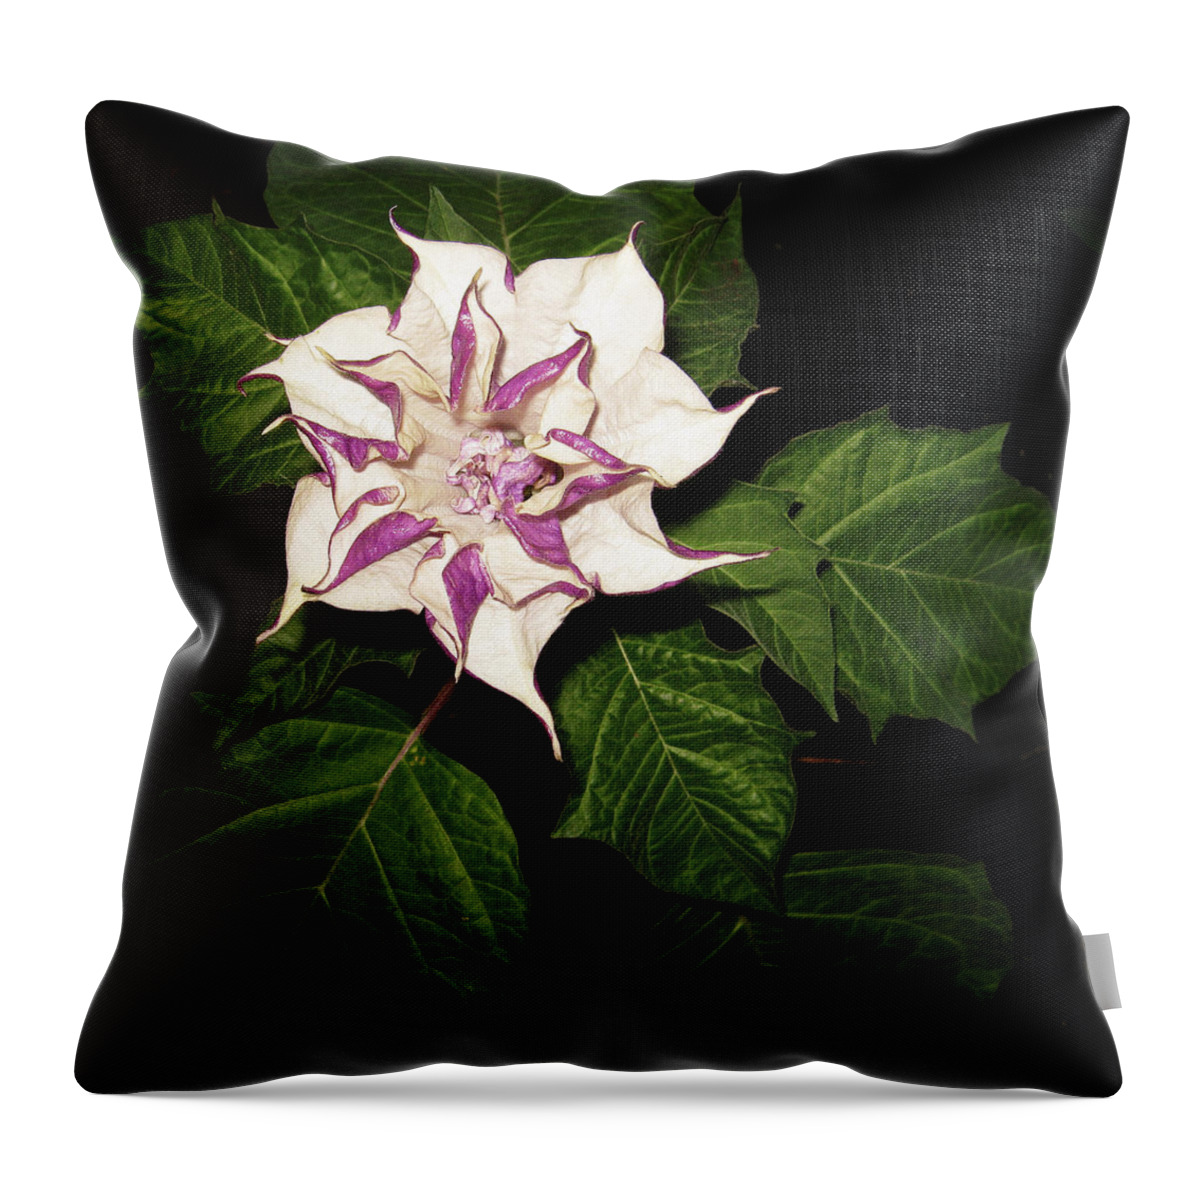 Black Background Throw Pillow featuring the photograph Datura Metel Indian Thorn Apple by Farmer Images